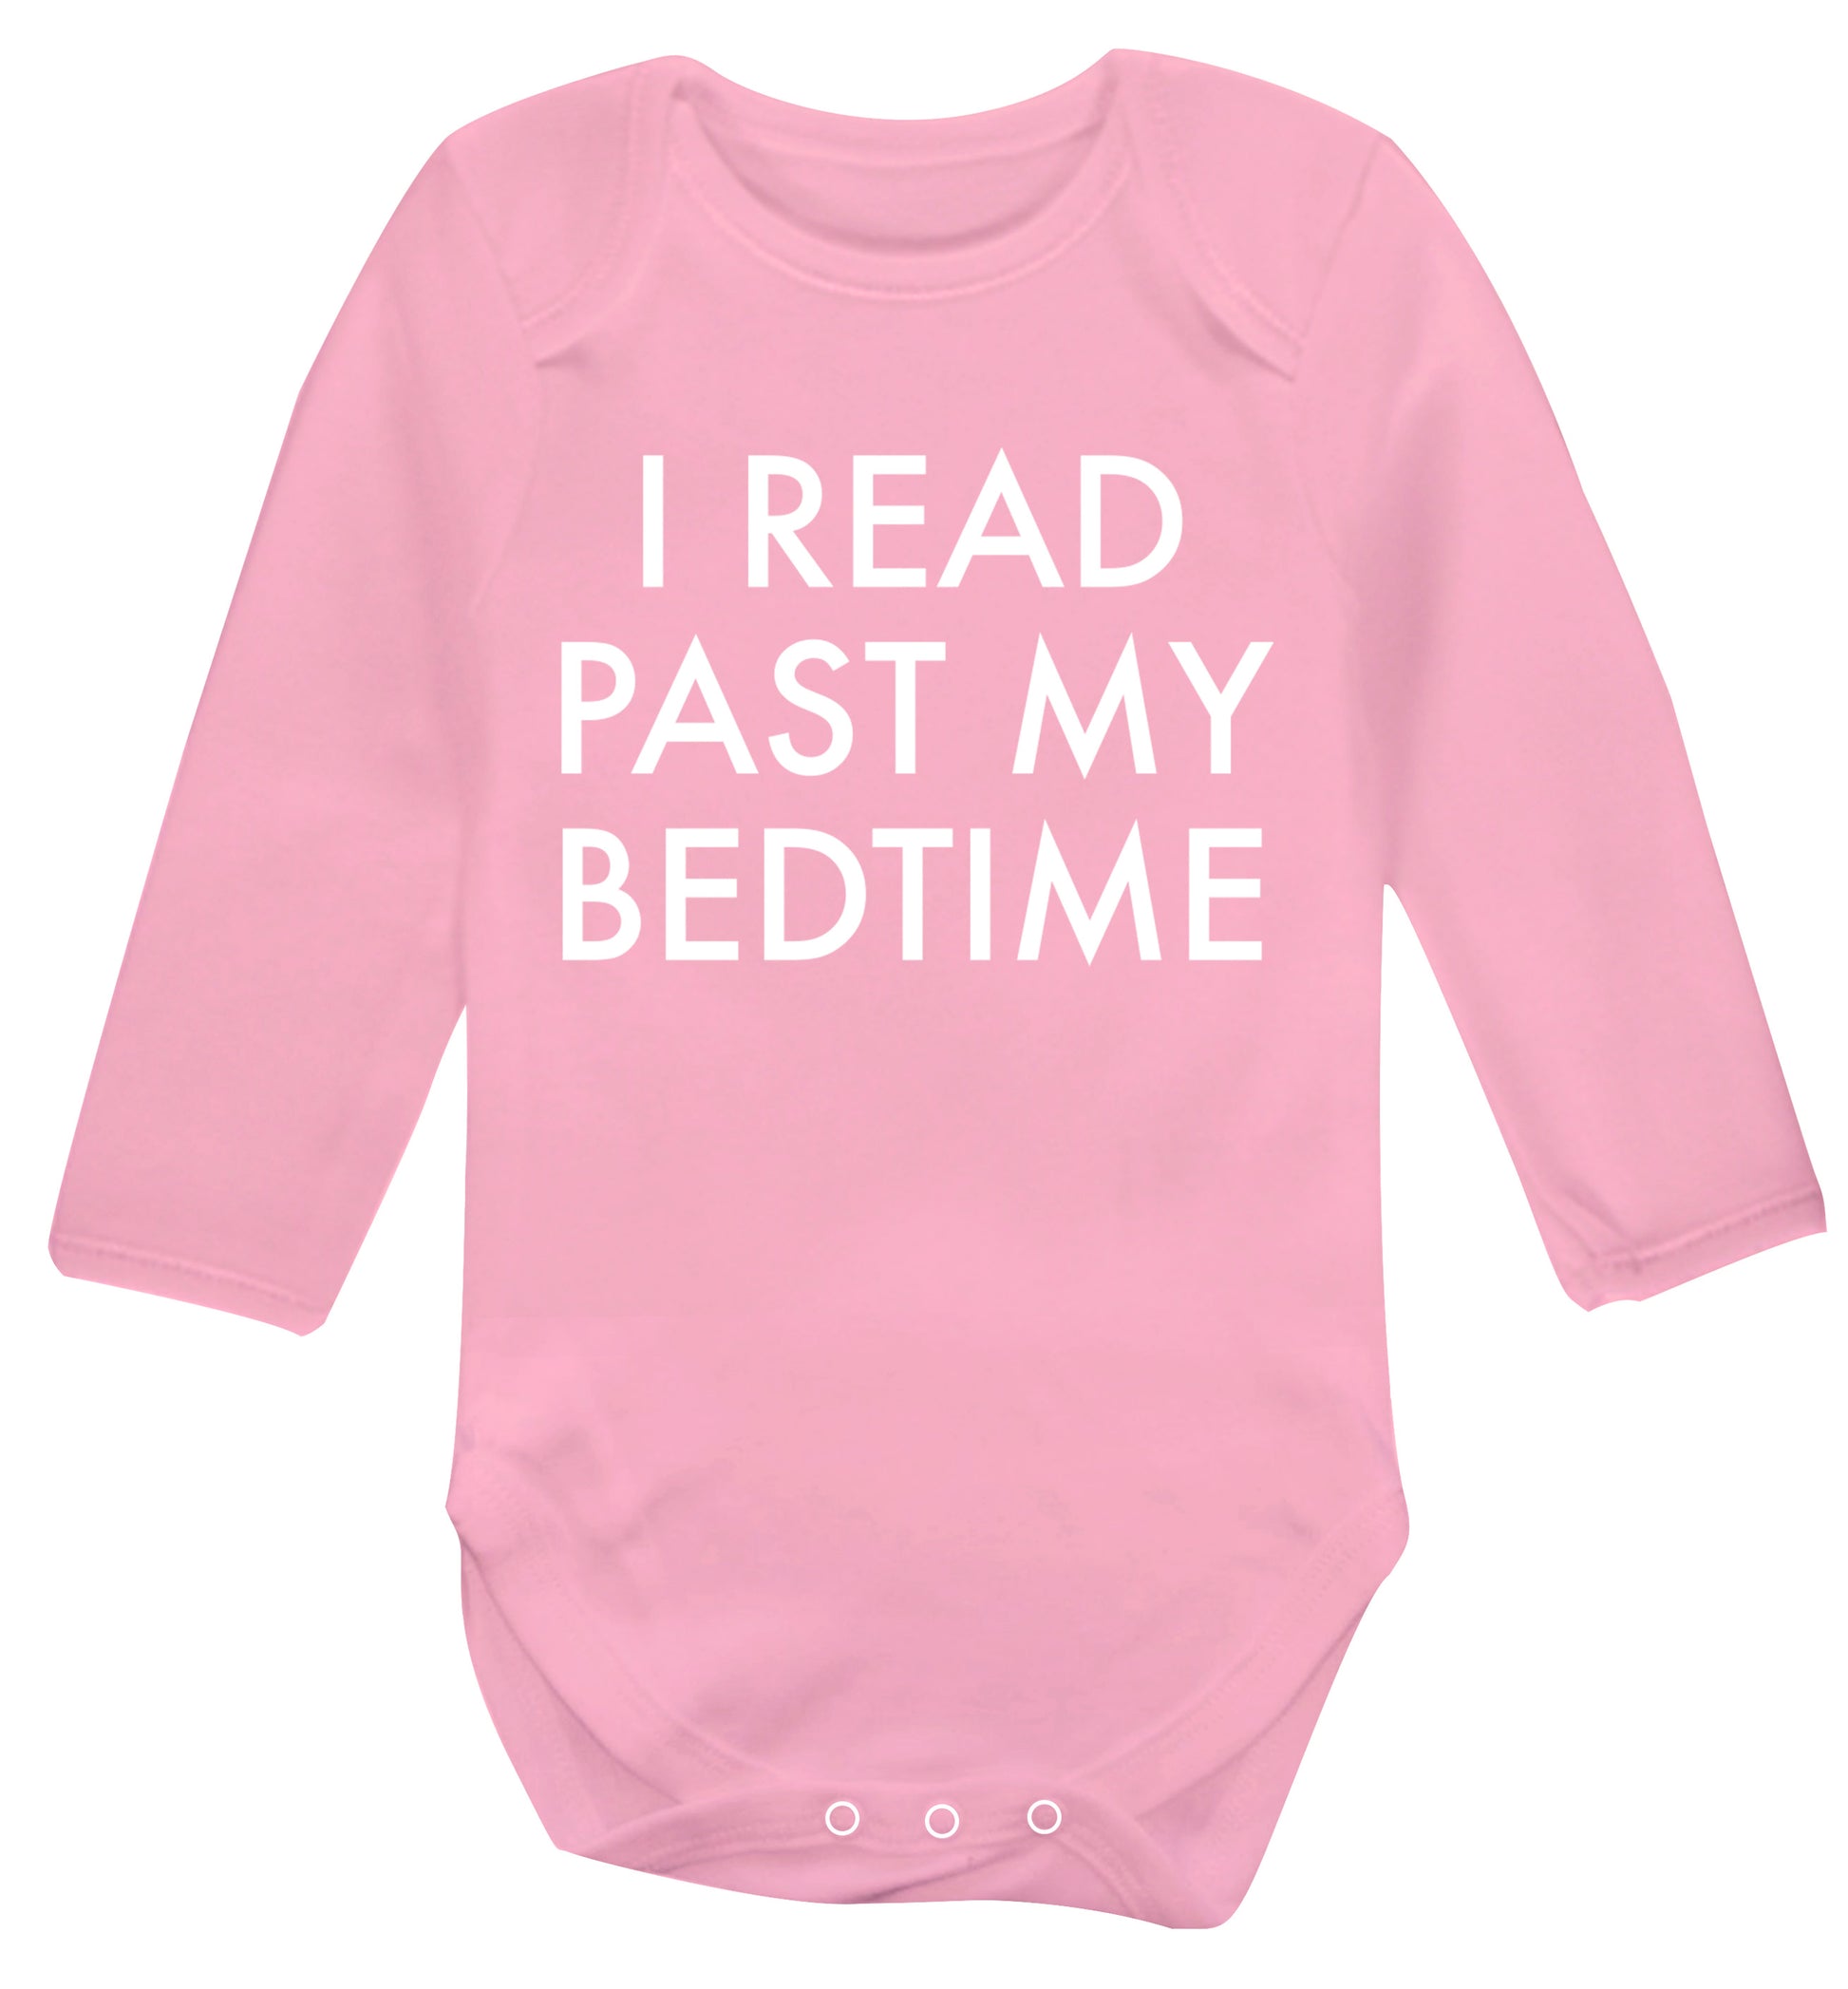 I read past my bedtime Baby Vest long sleeved pale pink 6-12 months